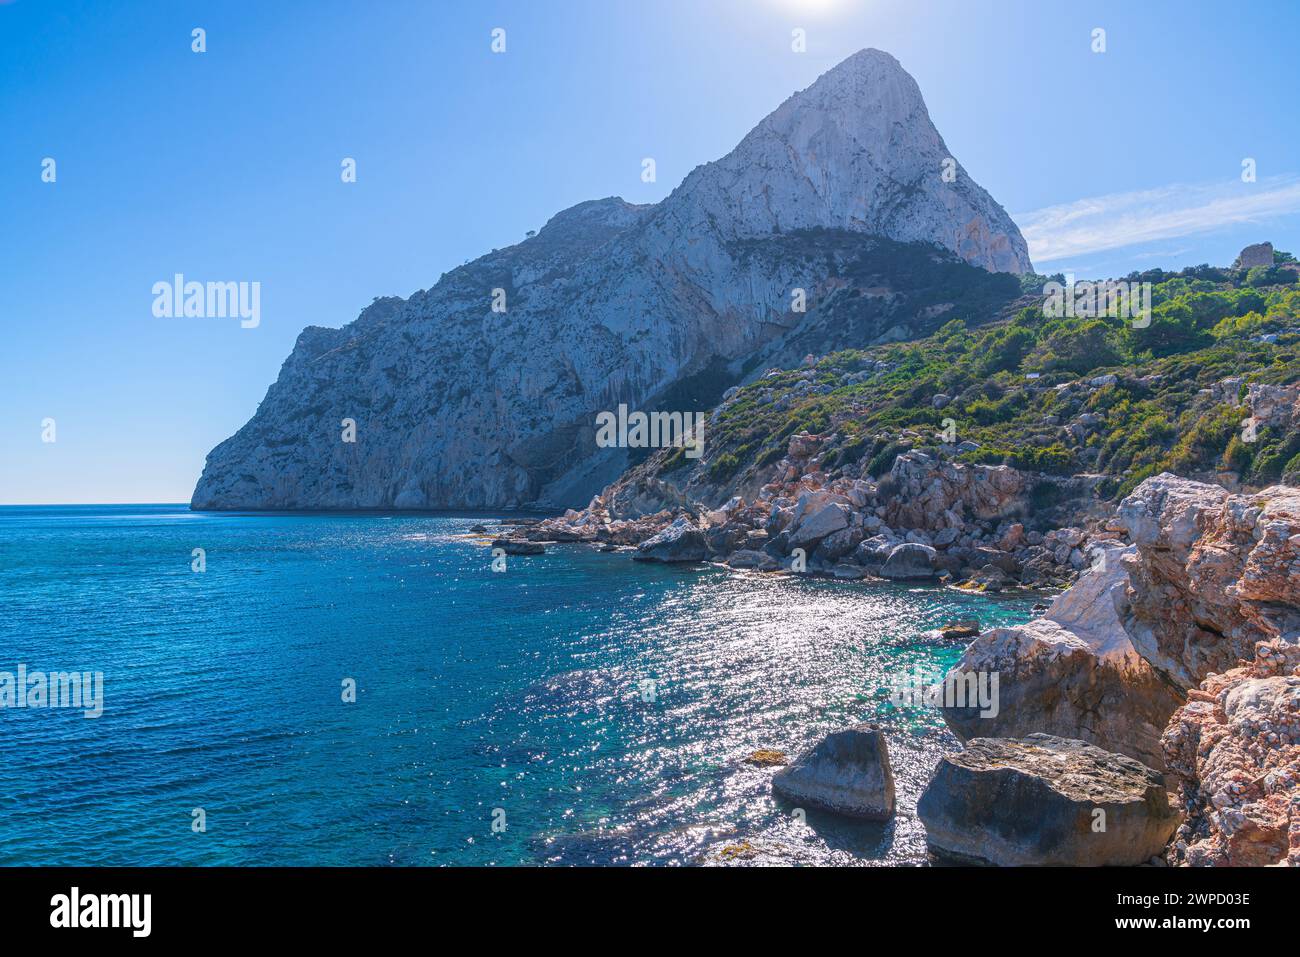 Scenic view of the Peñón de Ifach Nature Park on the Mediterranean Coast, Calpe, Spain Stock Photo